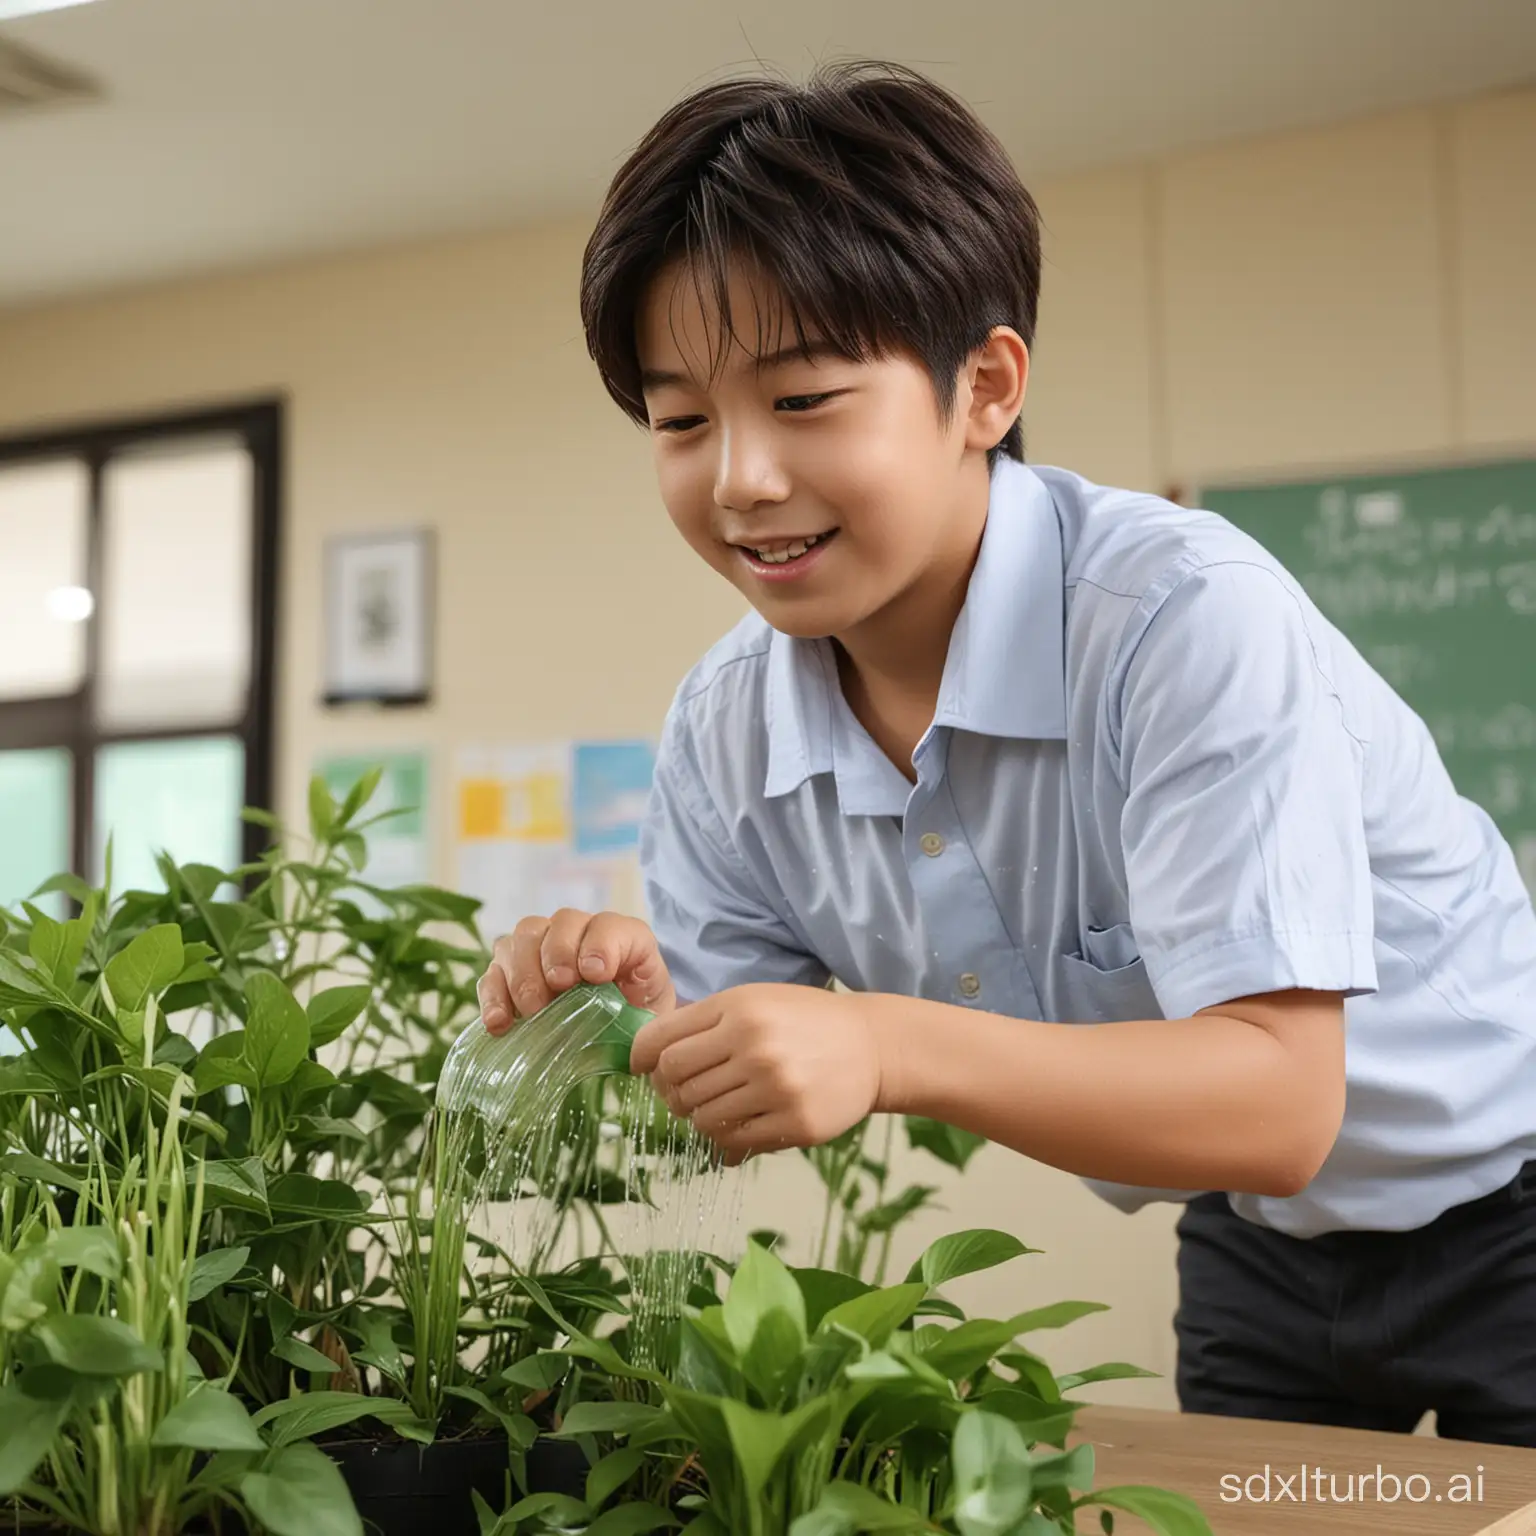 A 7 YEARS OLD BOY WITH BTS Jin face   watering flower plants in a classroom